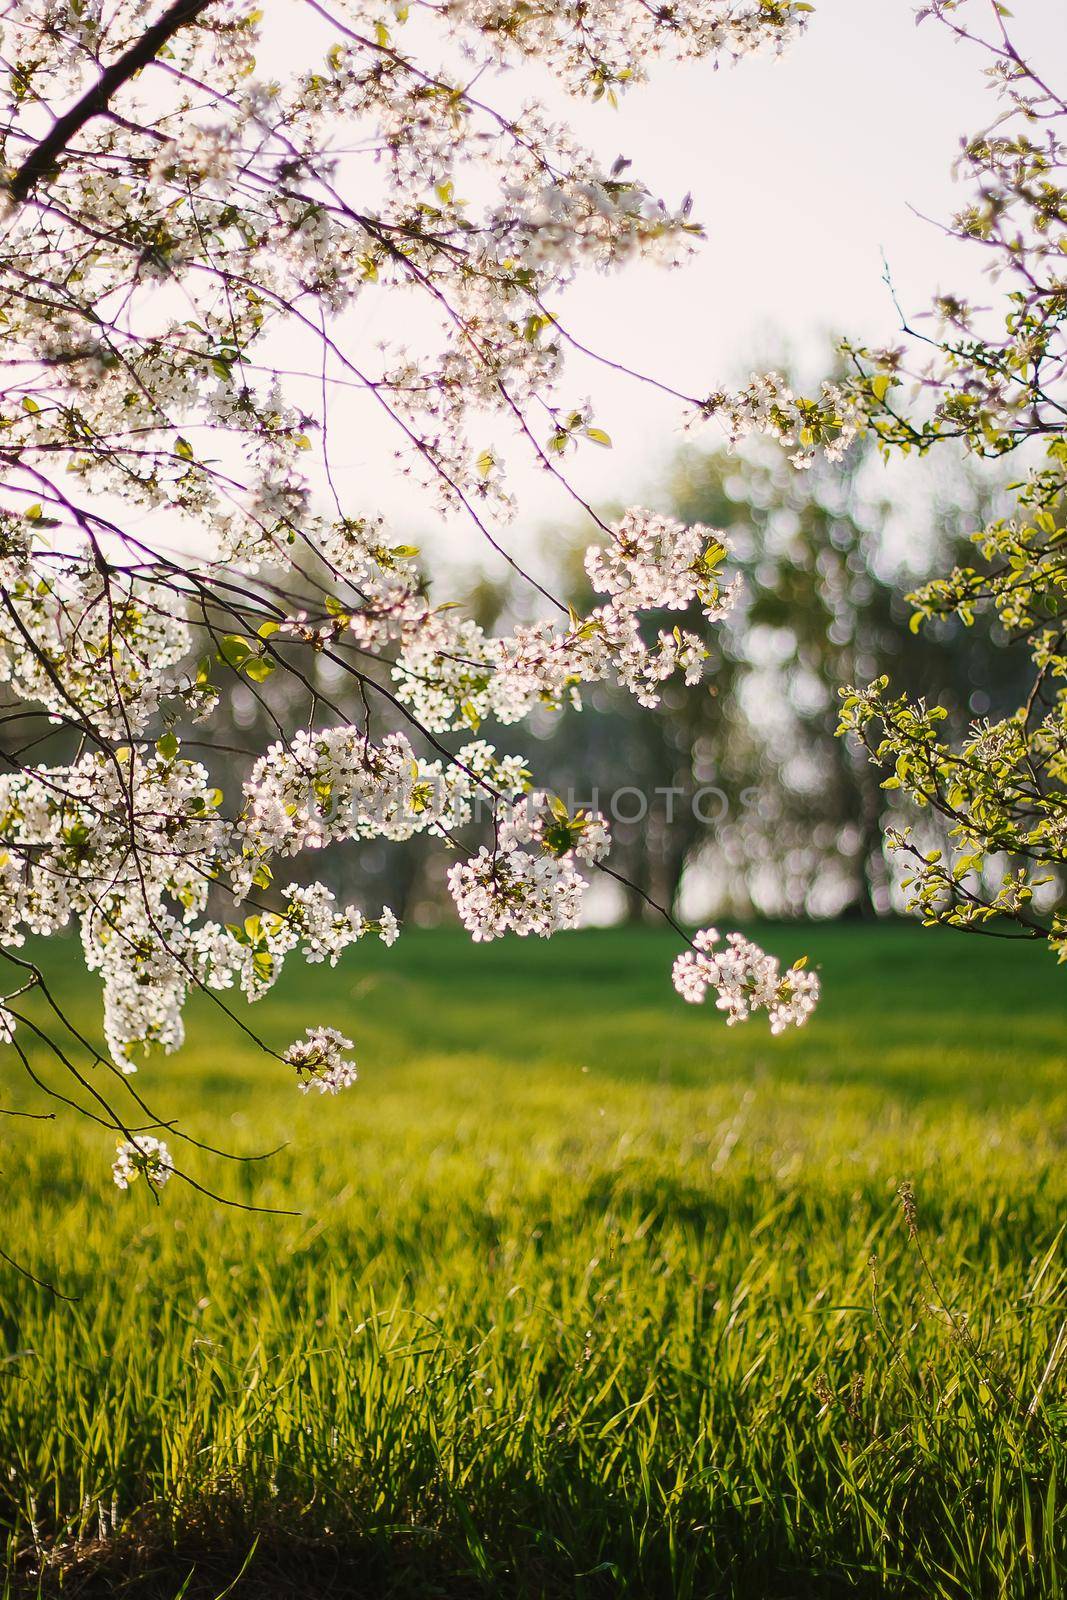 Cherry blossoms in an orchard in warm sunset rays. Beautiful nature scene with branch in bloom and sun flare. Spring flowers. Springtime by mmp1206